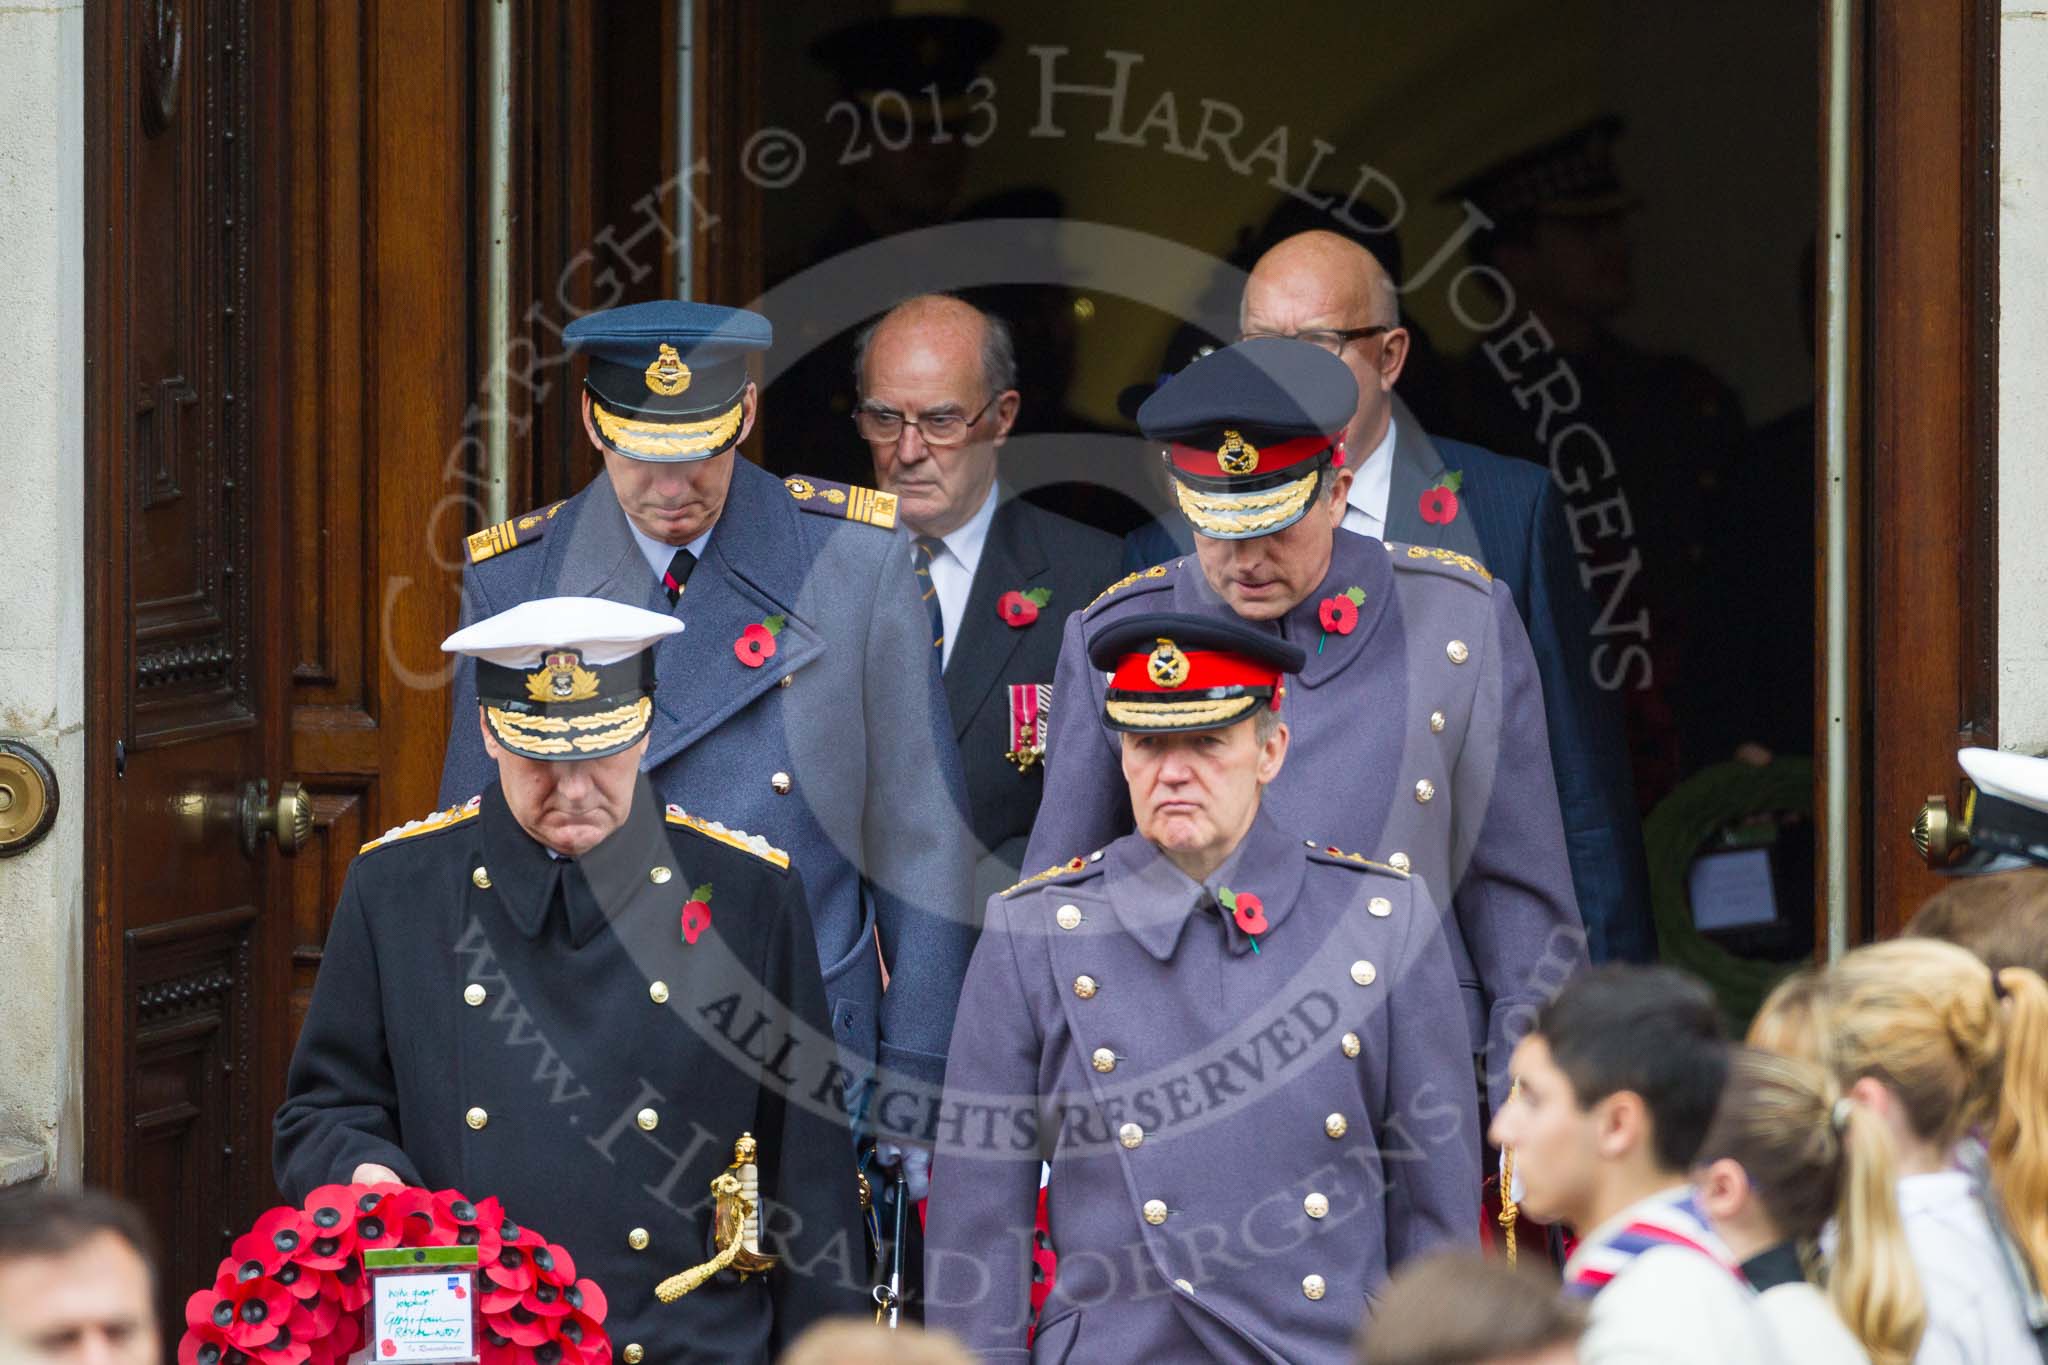 Remembrance Sunday at the Cenotaph 2015: Admiral Sir George Zambellas, the First Sea Lord  and Chief of the Naval Staff, and General Sir Nicholas Houghton, Chief of the Defence Staff  , leaving the Foreign- and Commonwealth Office Building. Image #91, 08 November 2015 10:55 Whitehall, London, UK